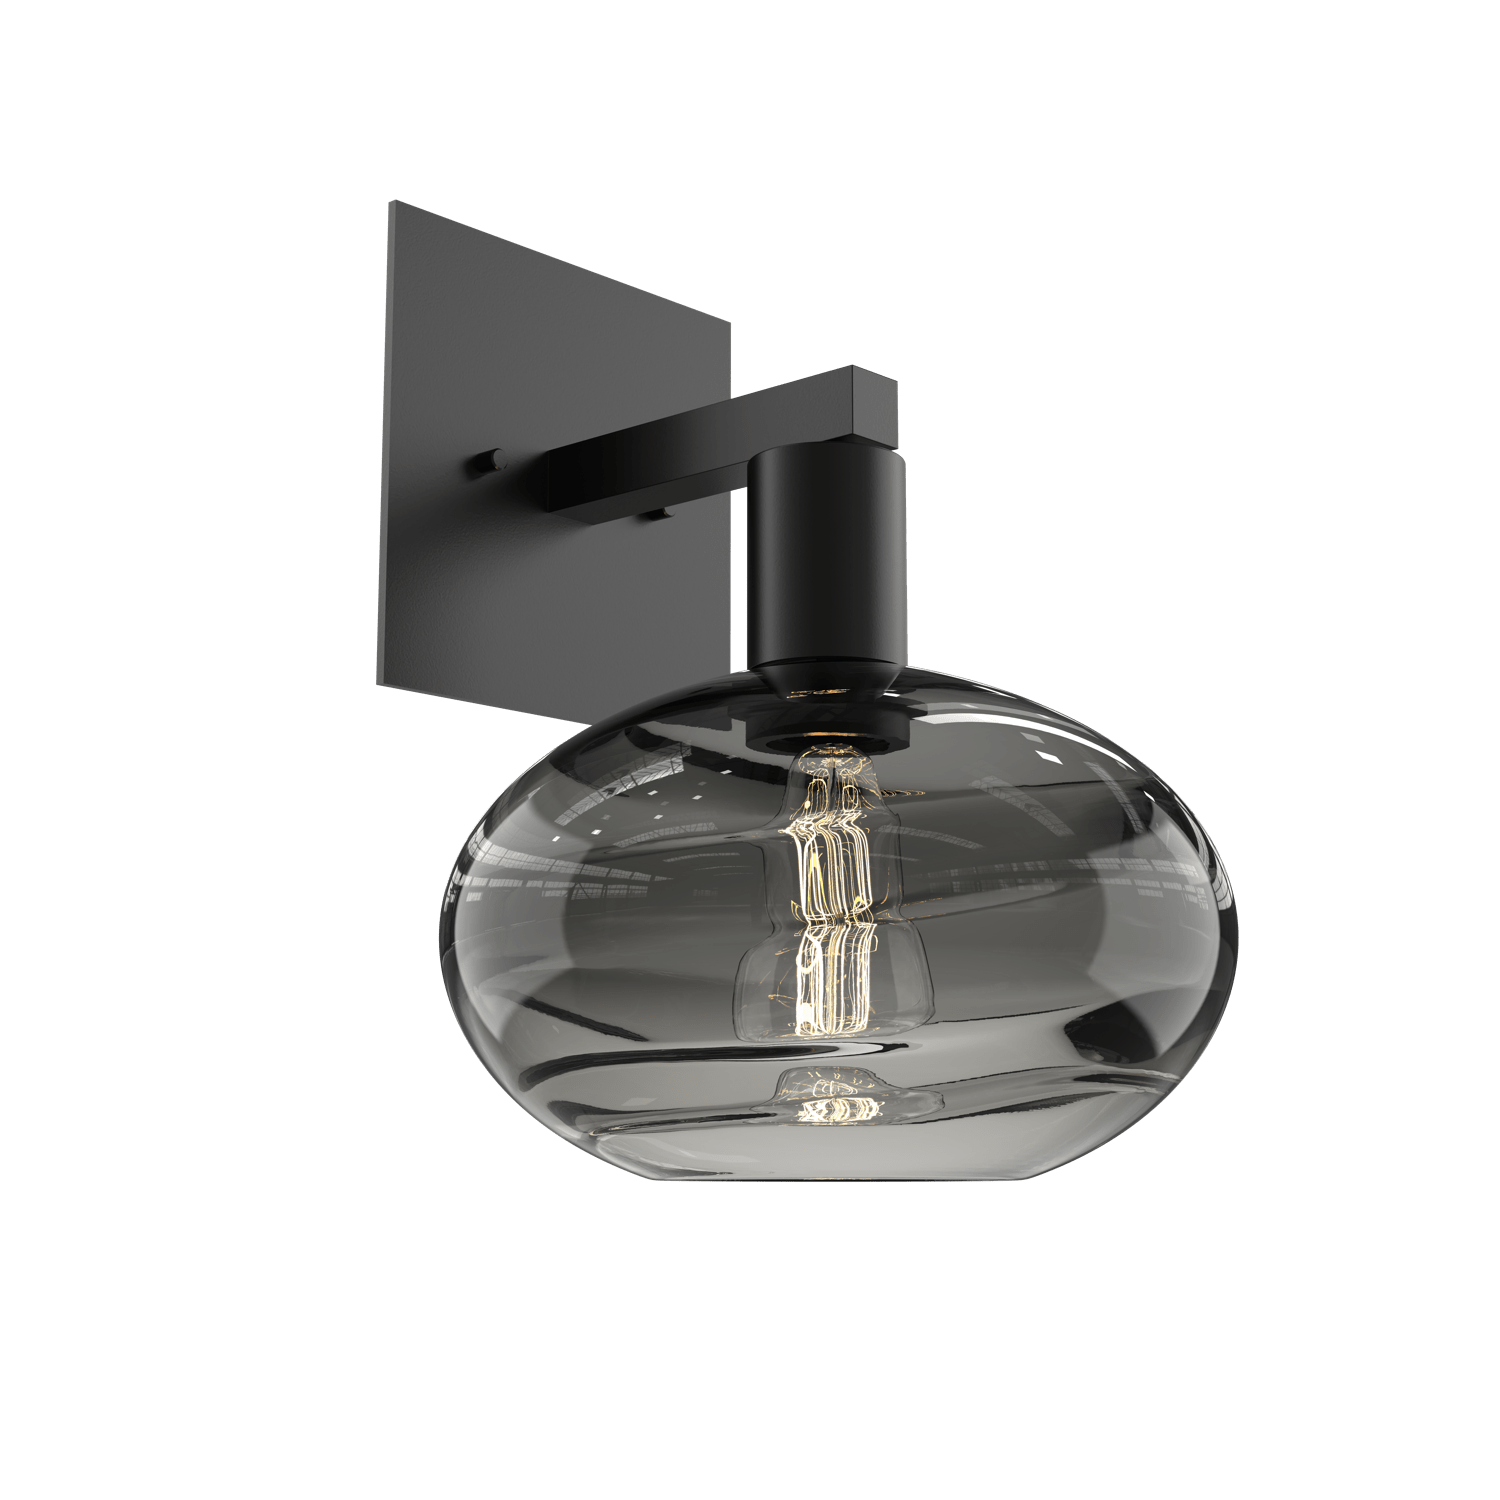 IDB0036-11-MB-OS-Hammerton-Studio-Optic-Blown-Glass-Coppa-wall-sconce-with-matte-black-finish-and-optic-smoke-blown-glass-shades-and-incandescent-lamping